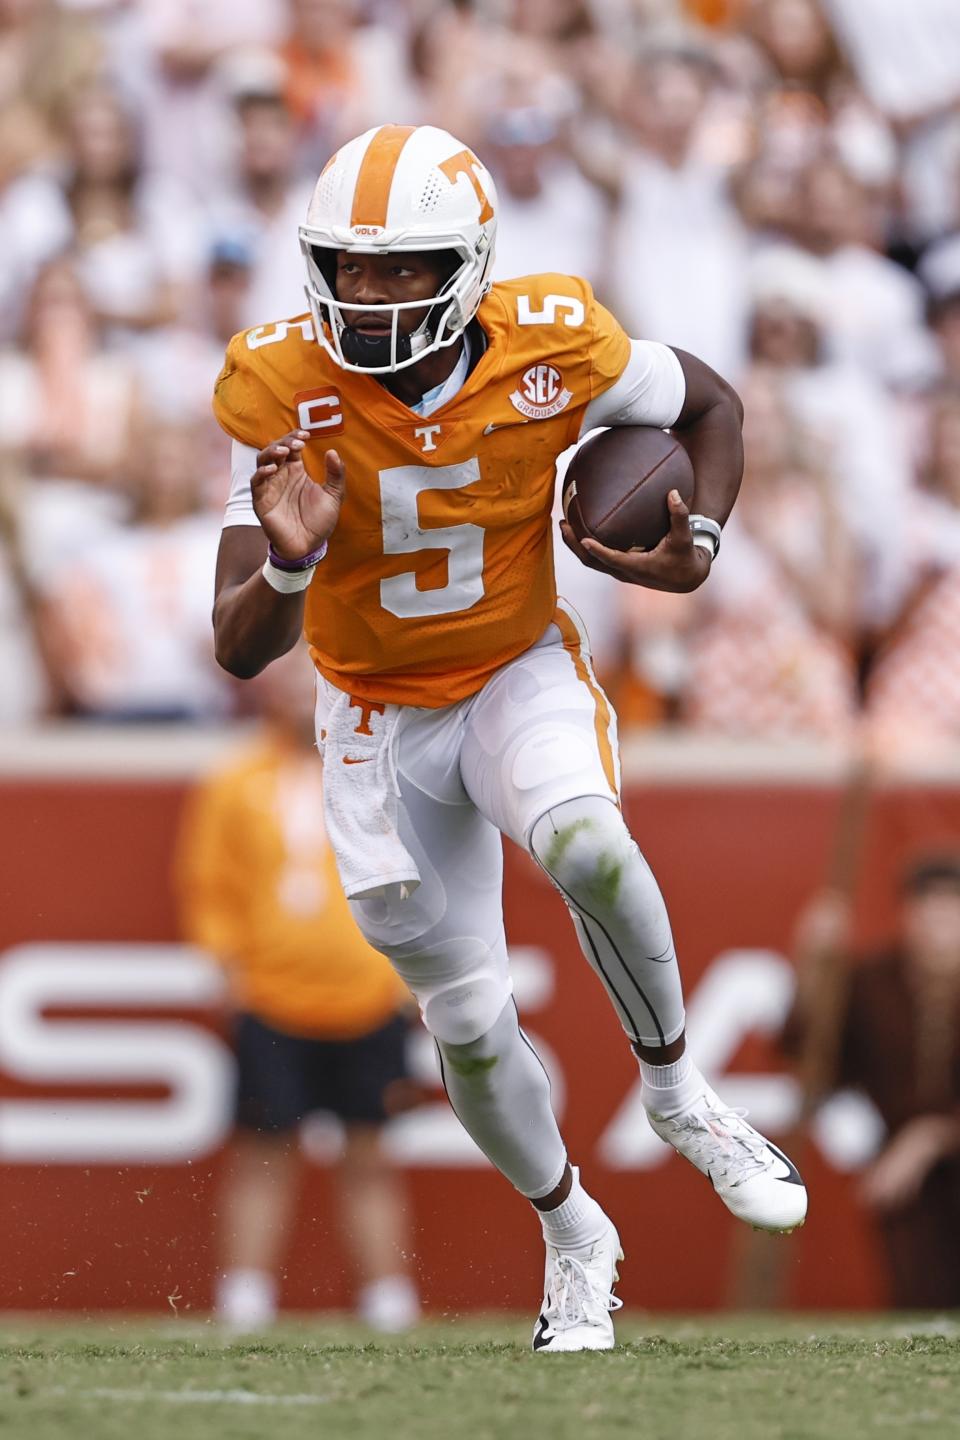 FILE - Tennessee quarterback Hendon Hooker (5) runs for yardage during the second half of an NCAA college football game against Florida, Saturday, Sept. 24, 2022, in Knoxville, Tenn. Alabama's Bryce Young, Ohio State's C.J. Stroud, Kentucky's Will Levis and Florida's Anthony Richardson all will make fan bases very happy on April 27, but the steal of the draft could end up being Tennessee's Hendon Hooker. (AP Photo/Wade Payne, File)